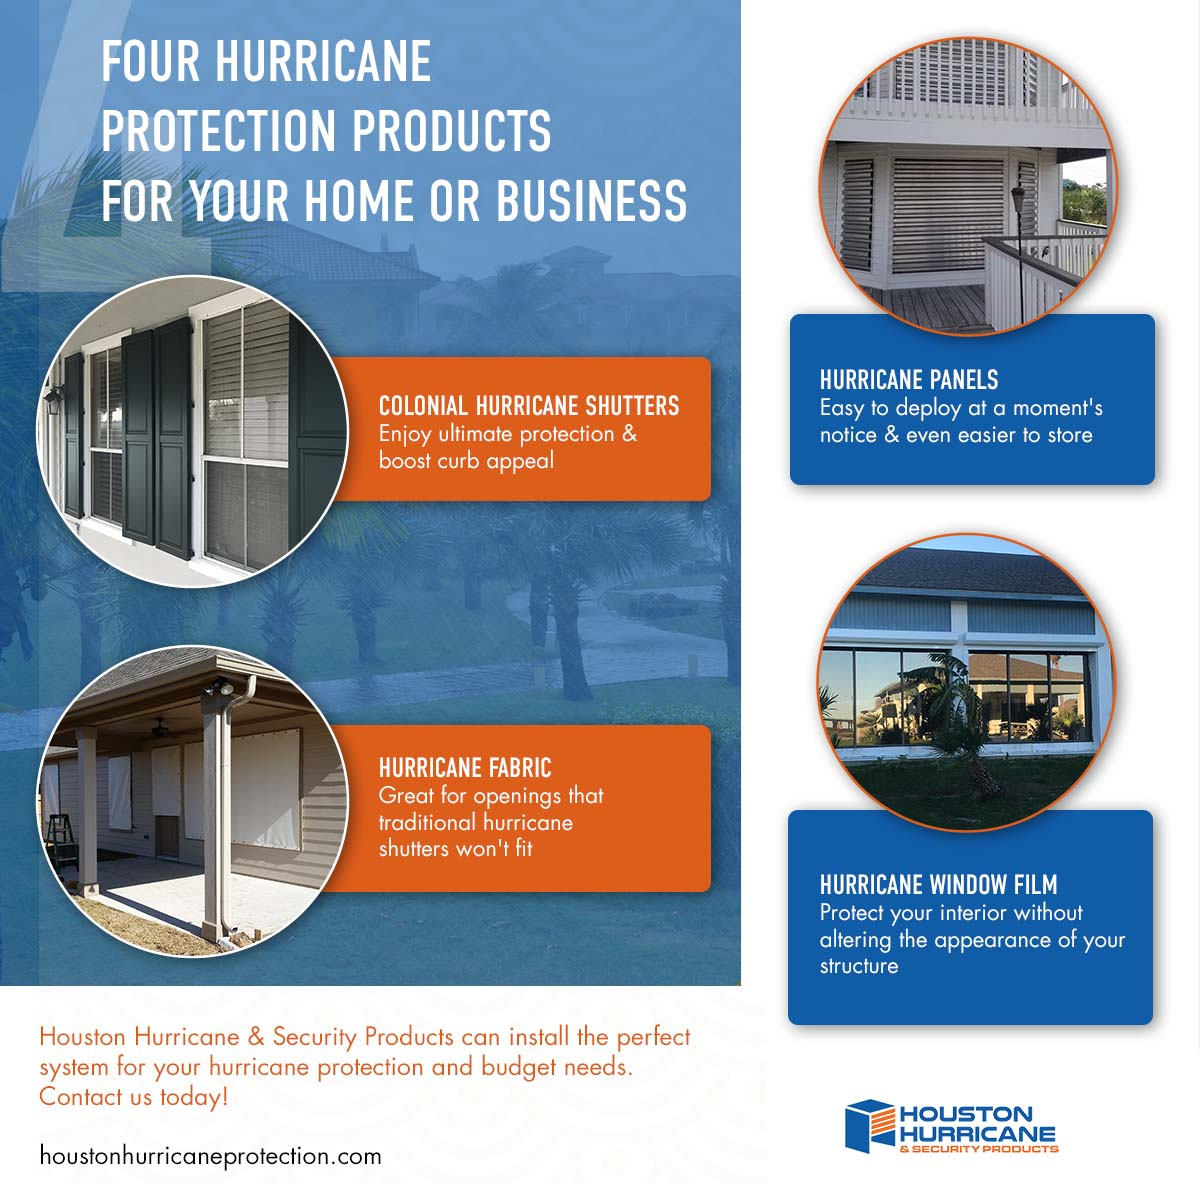 Four Hurricane Protection Products for Your Home or Business_Infographic